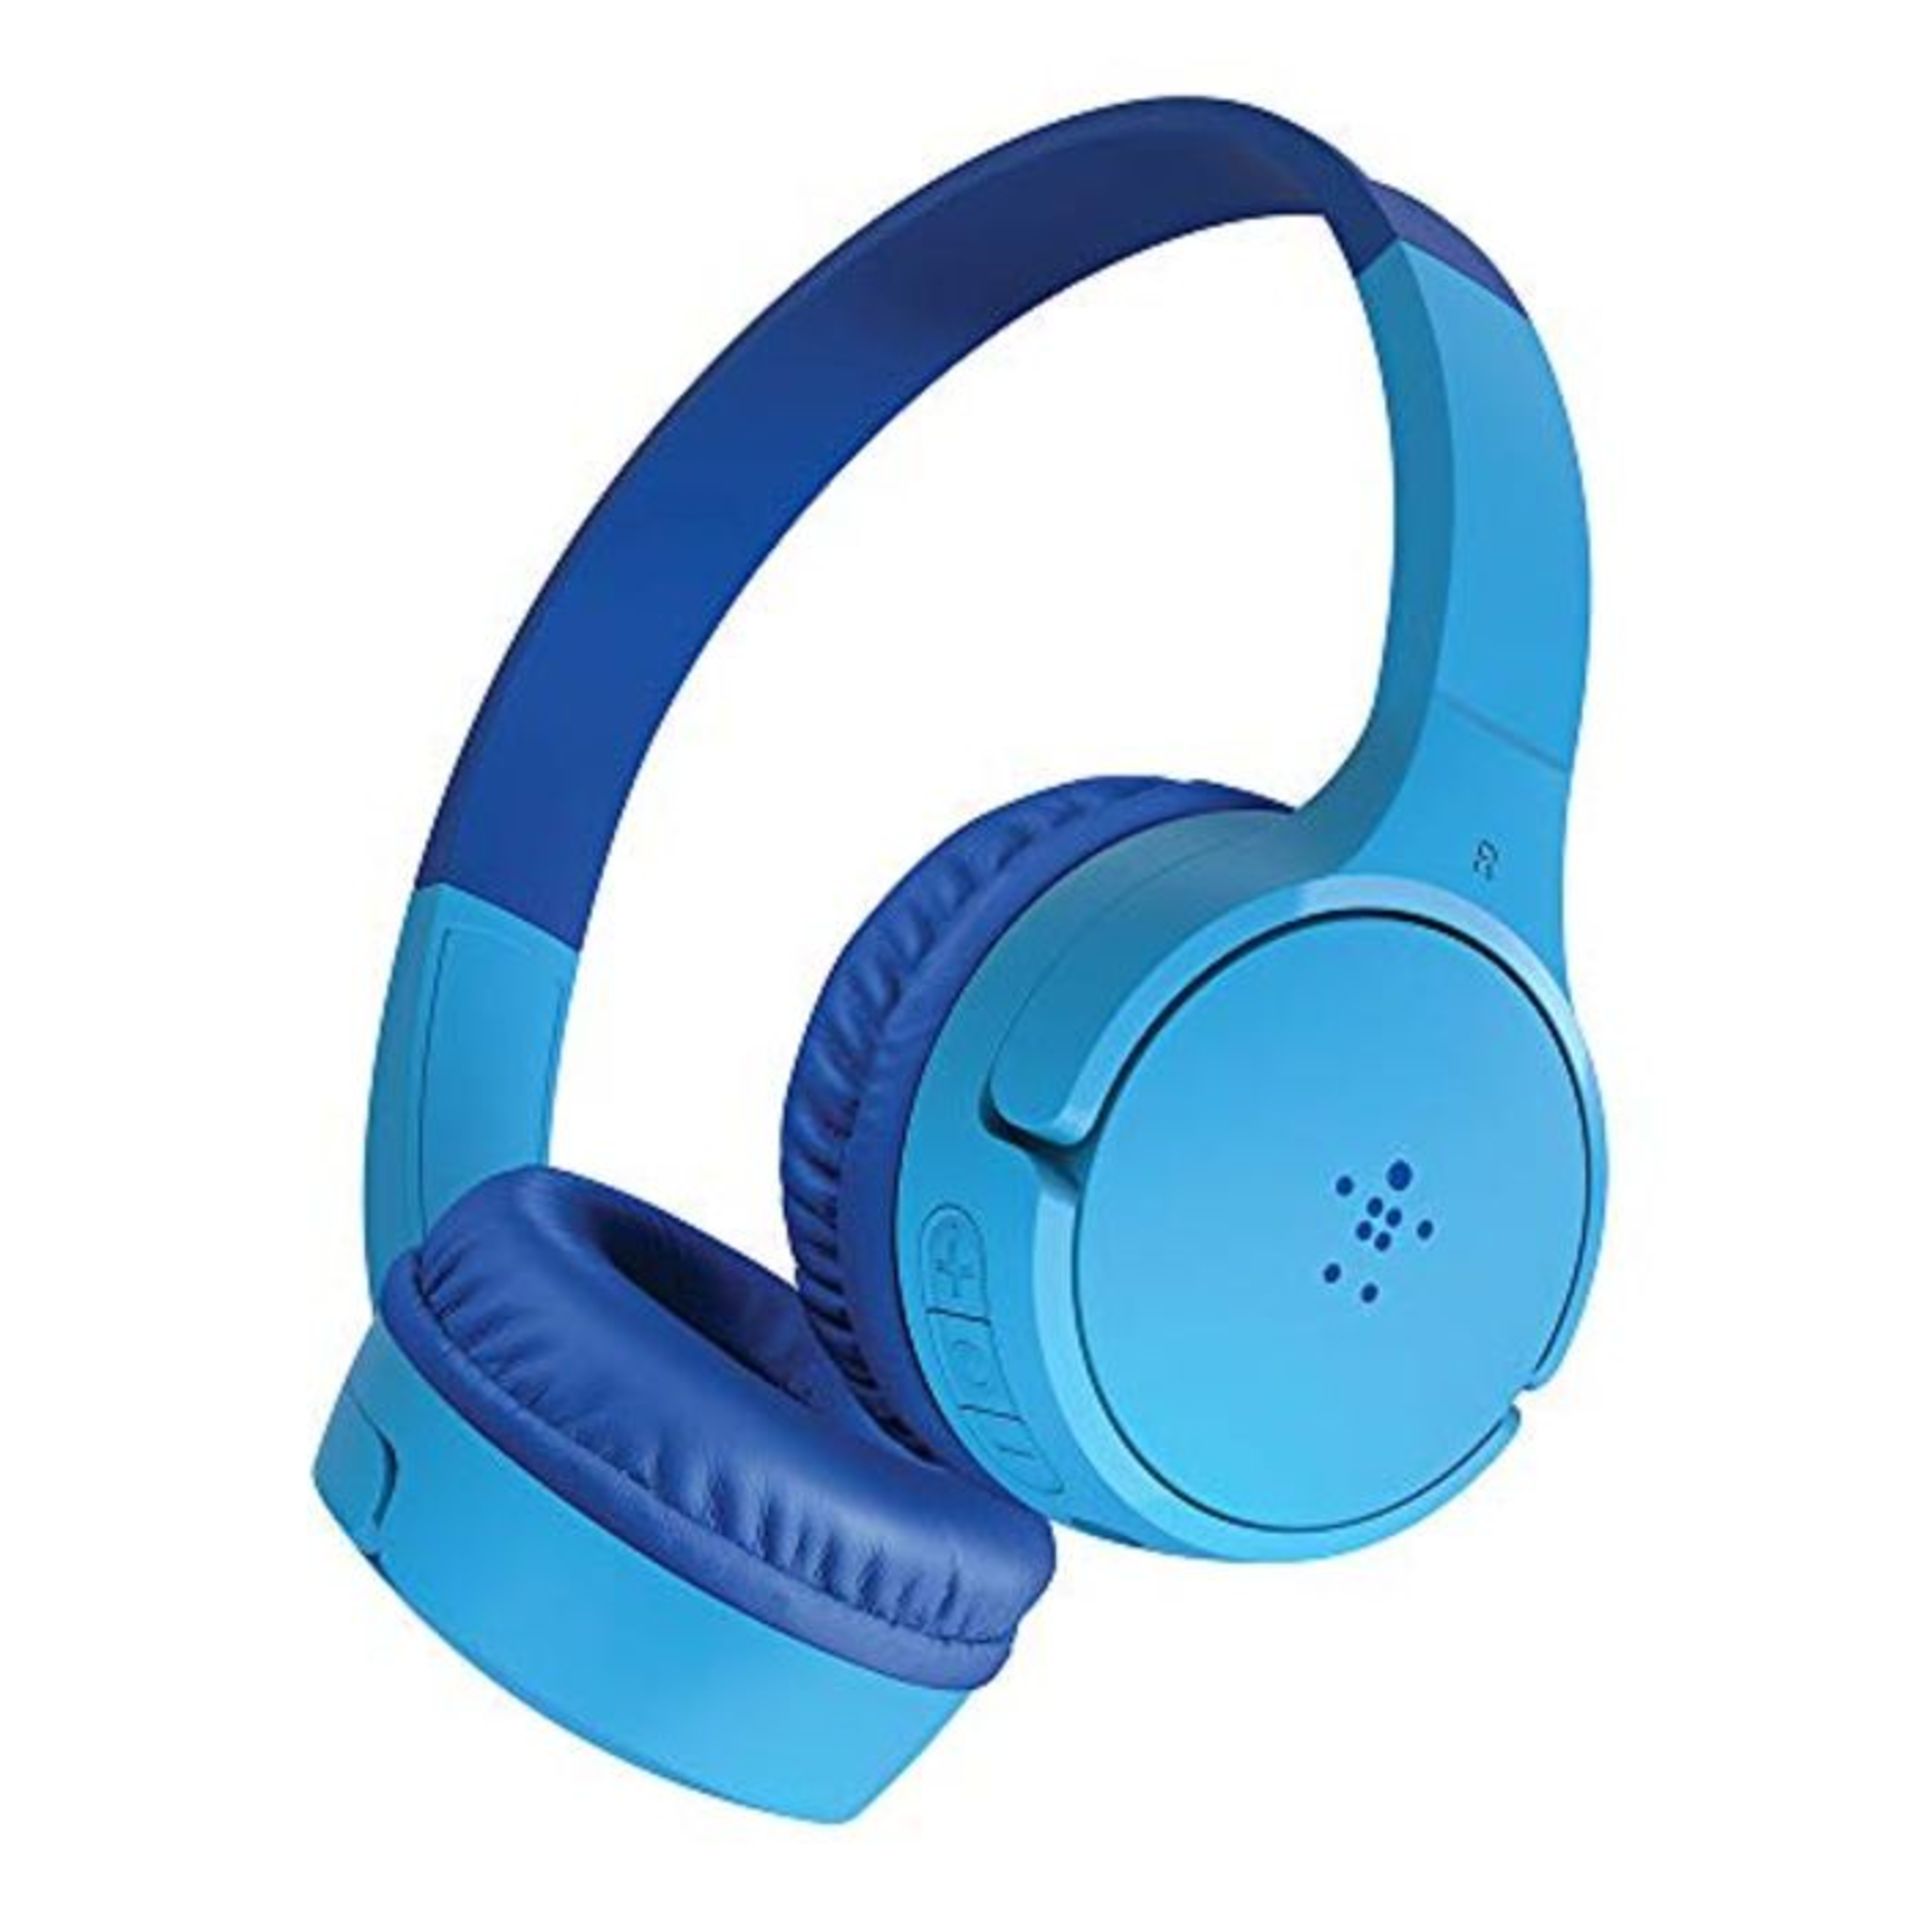 Belkin SoundForm Kids On Ear Wireless Headphones (with Built in Microphone, Girls and